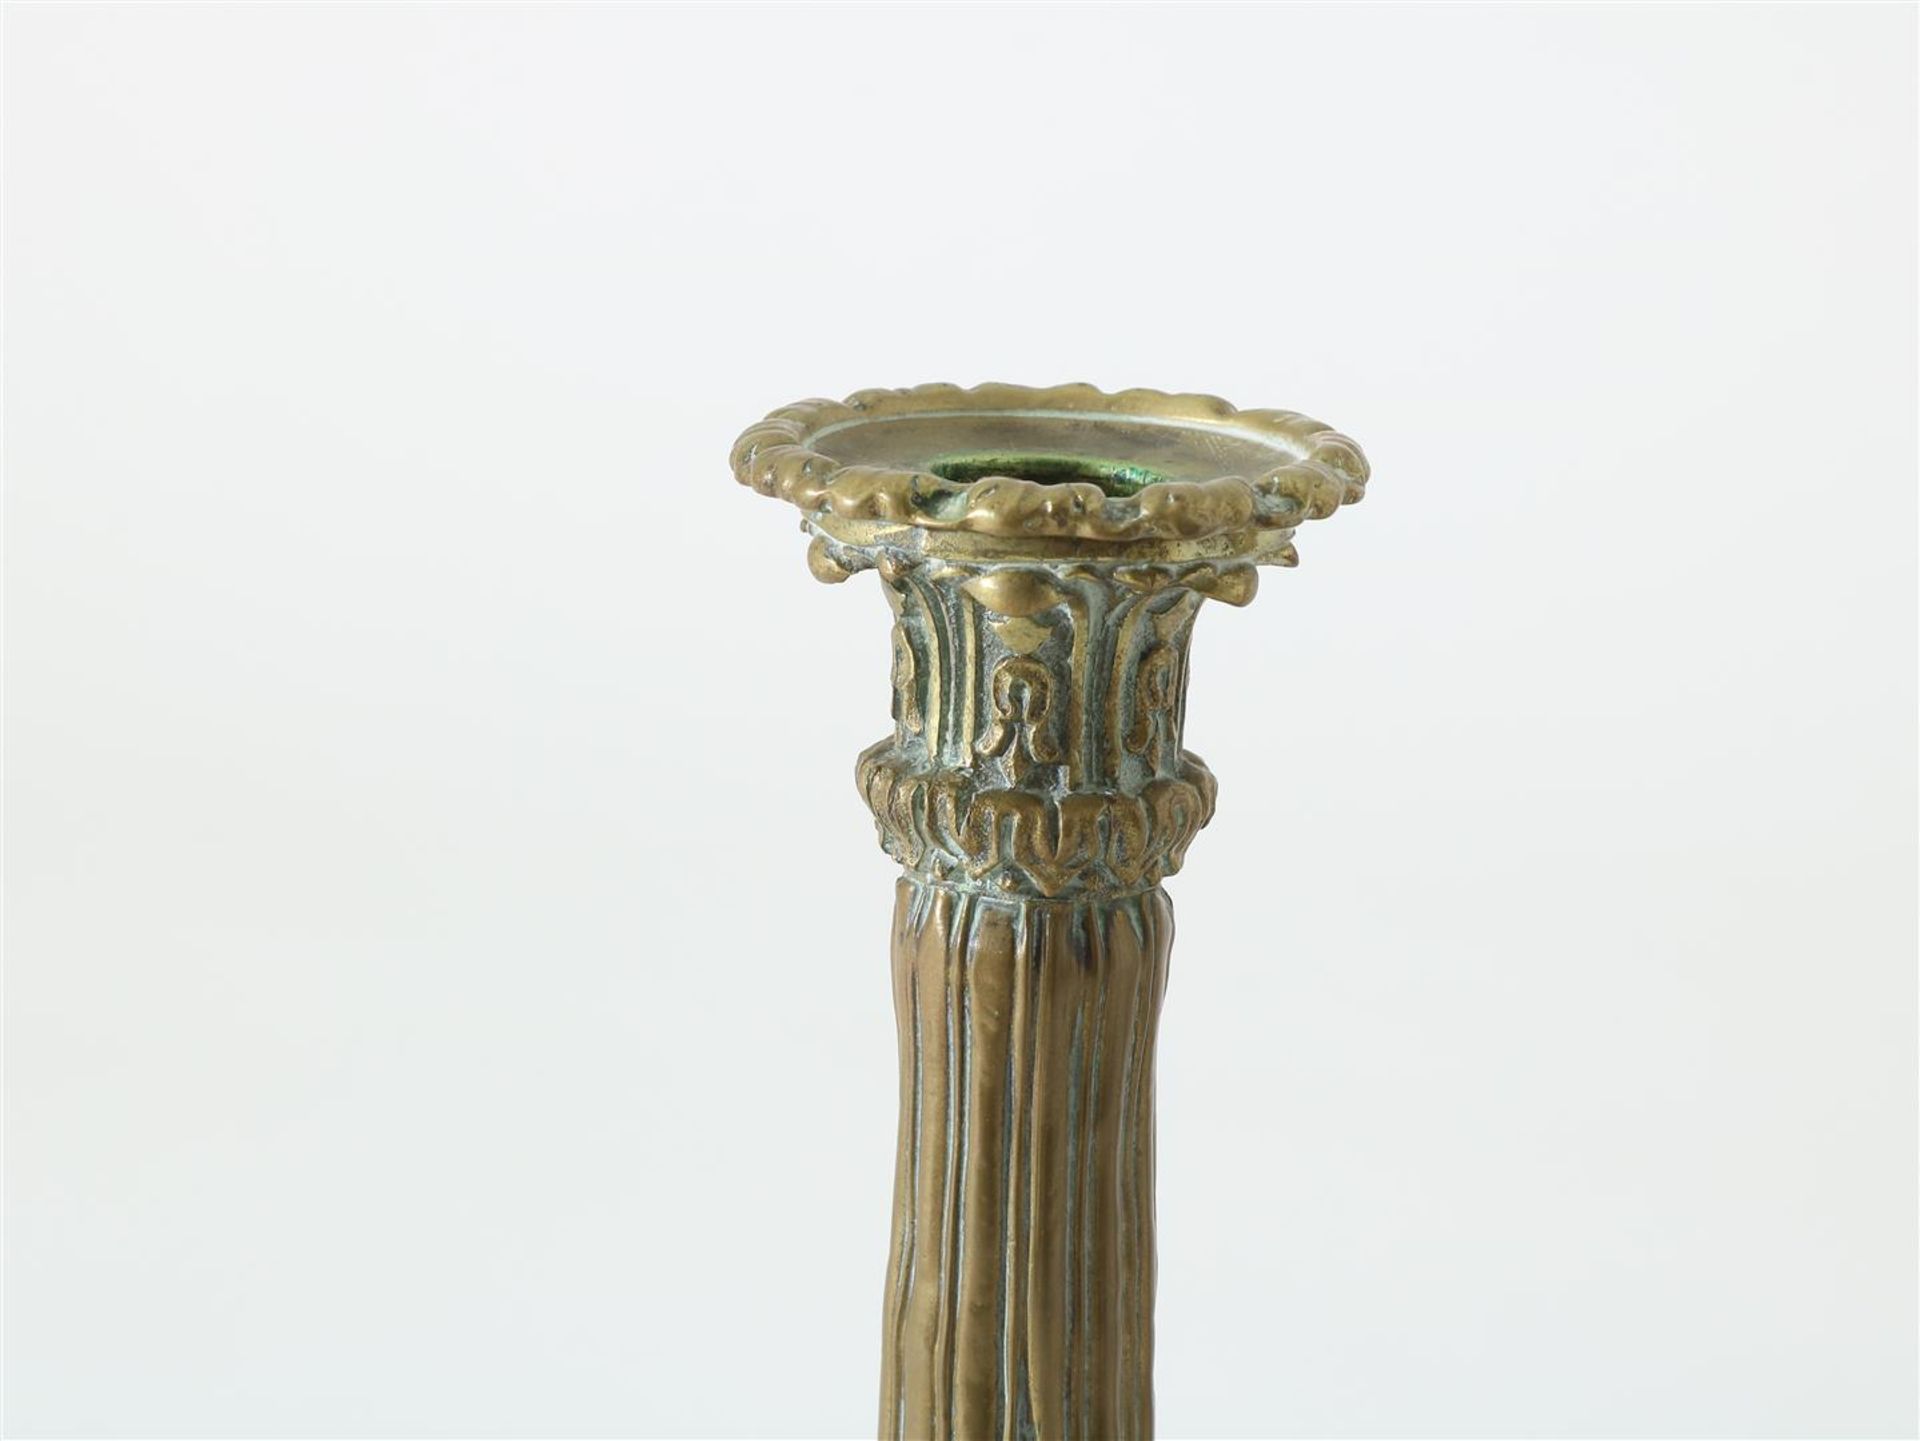 Two brass candlesticks on claw feet, 19th century, height 29 cm. - Image 2 of 4